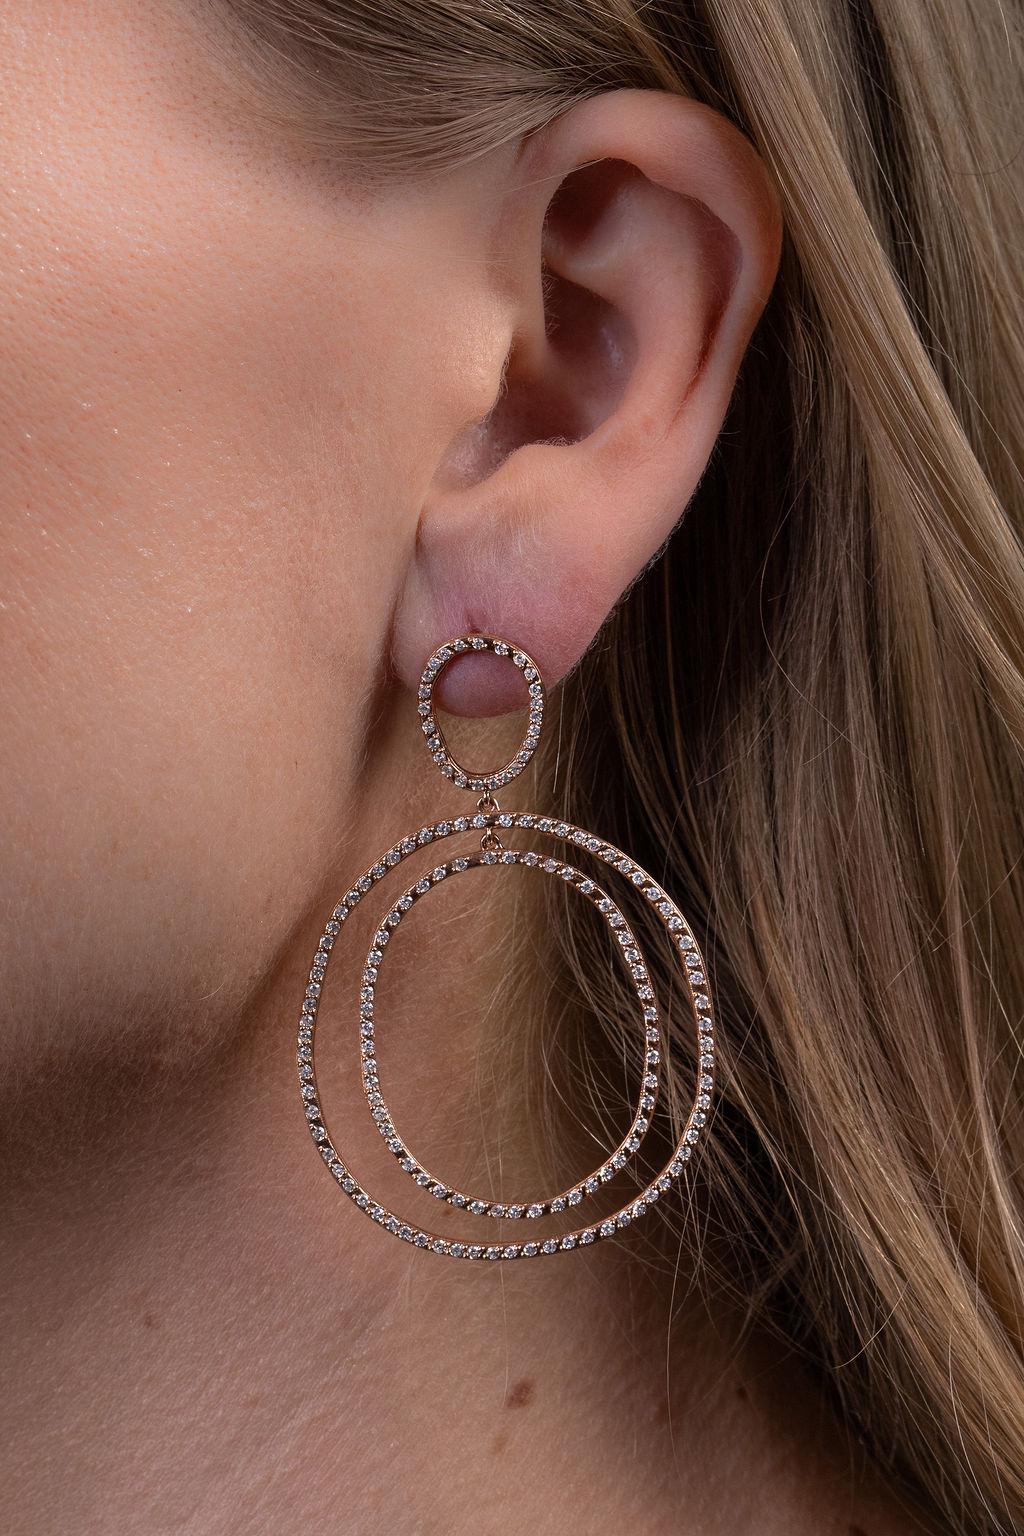 These simple yet sophisticated double ovals are all about movement.  These versatile earrings transition beautifully from jeans to an evening dress.  Handcrafted in 18k rose gold, the earrings measure 3 1/2 inches and include approxiamately 2 carats